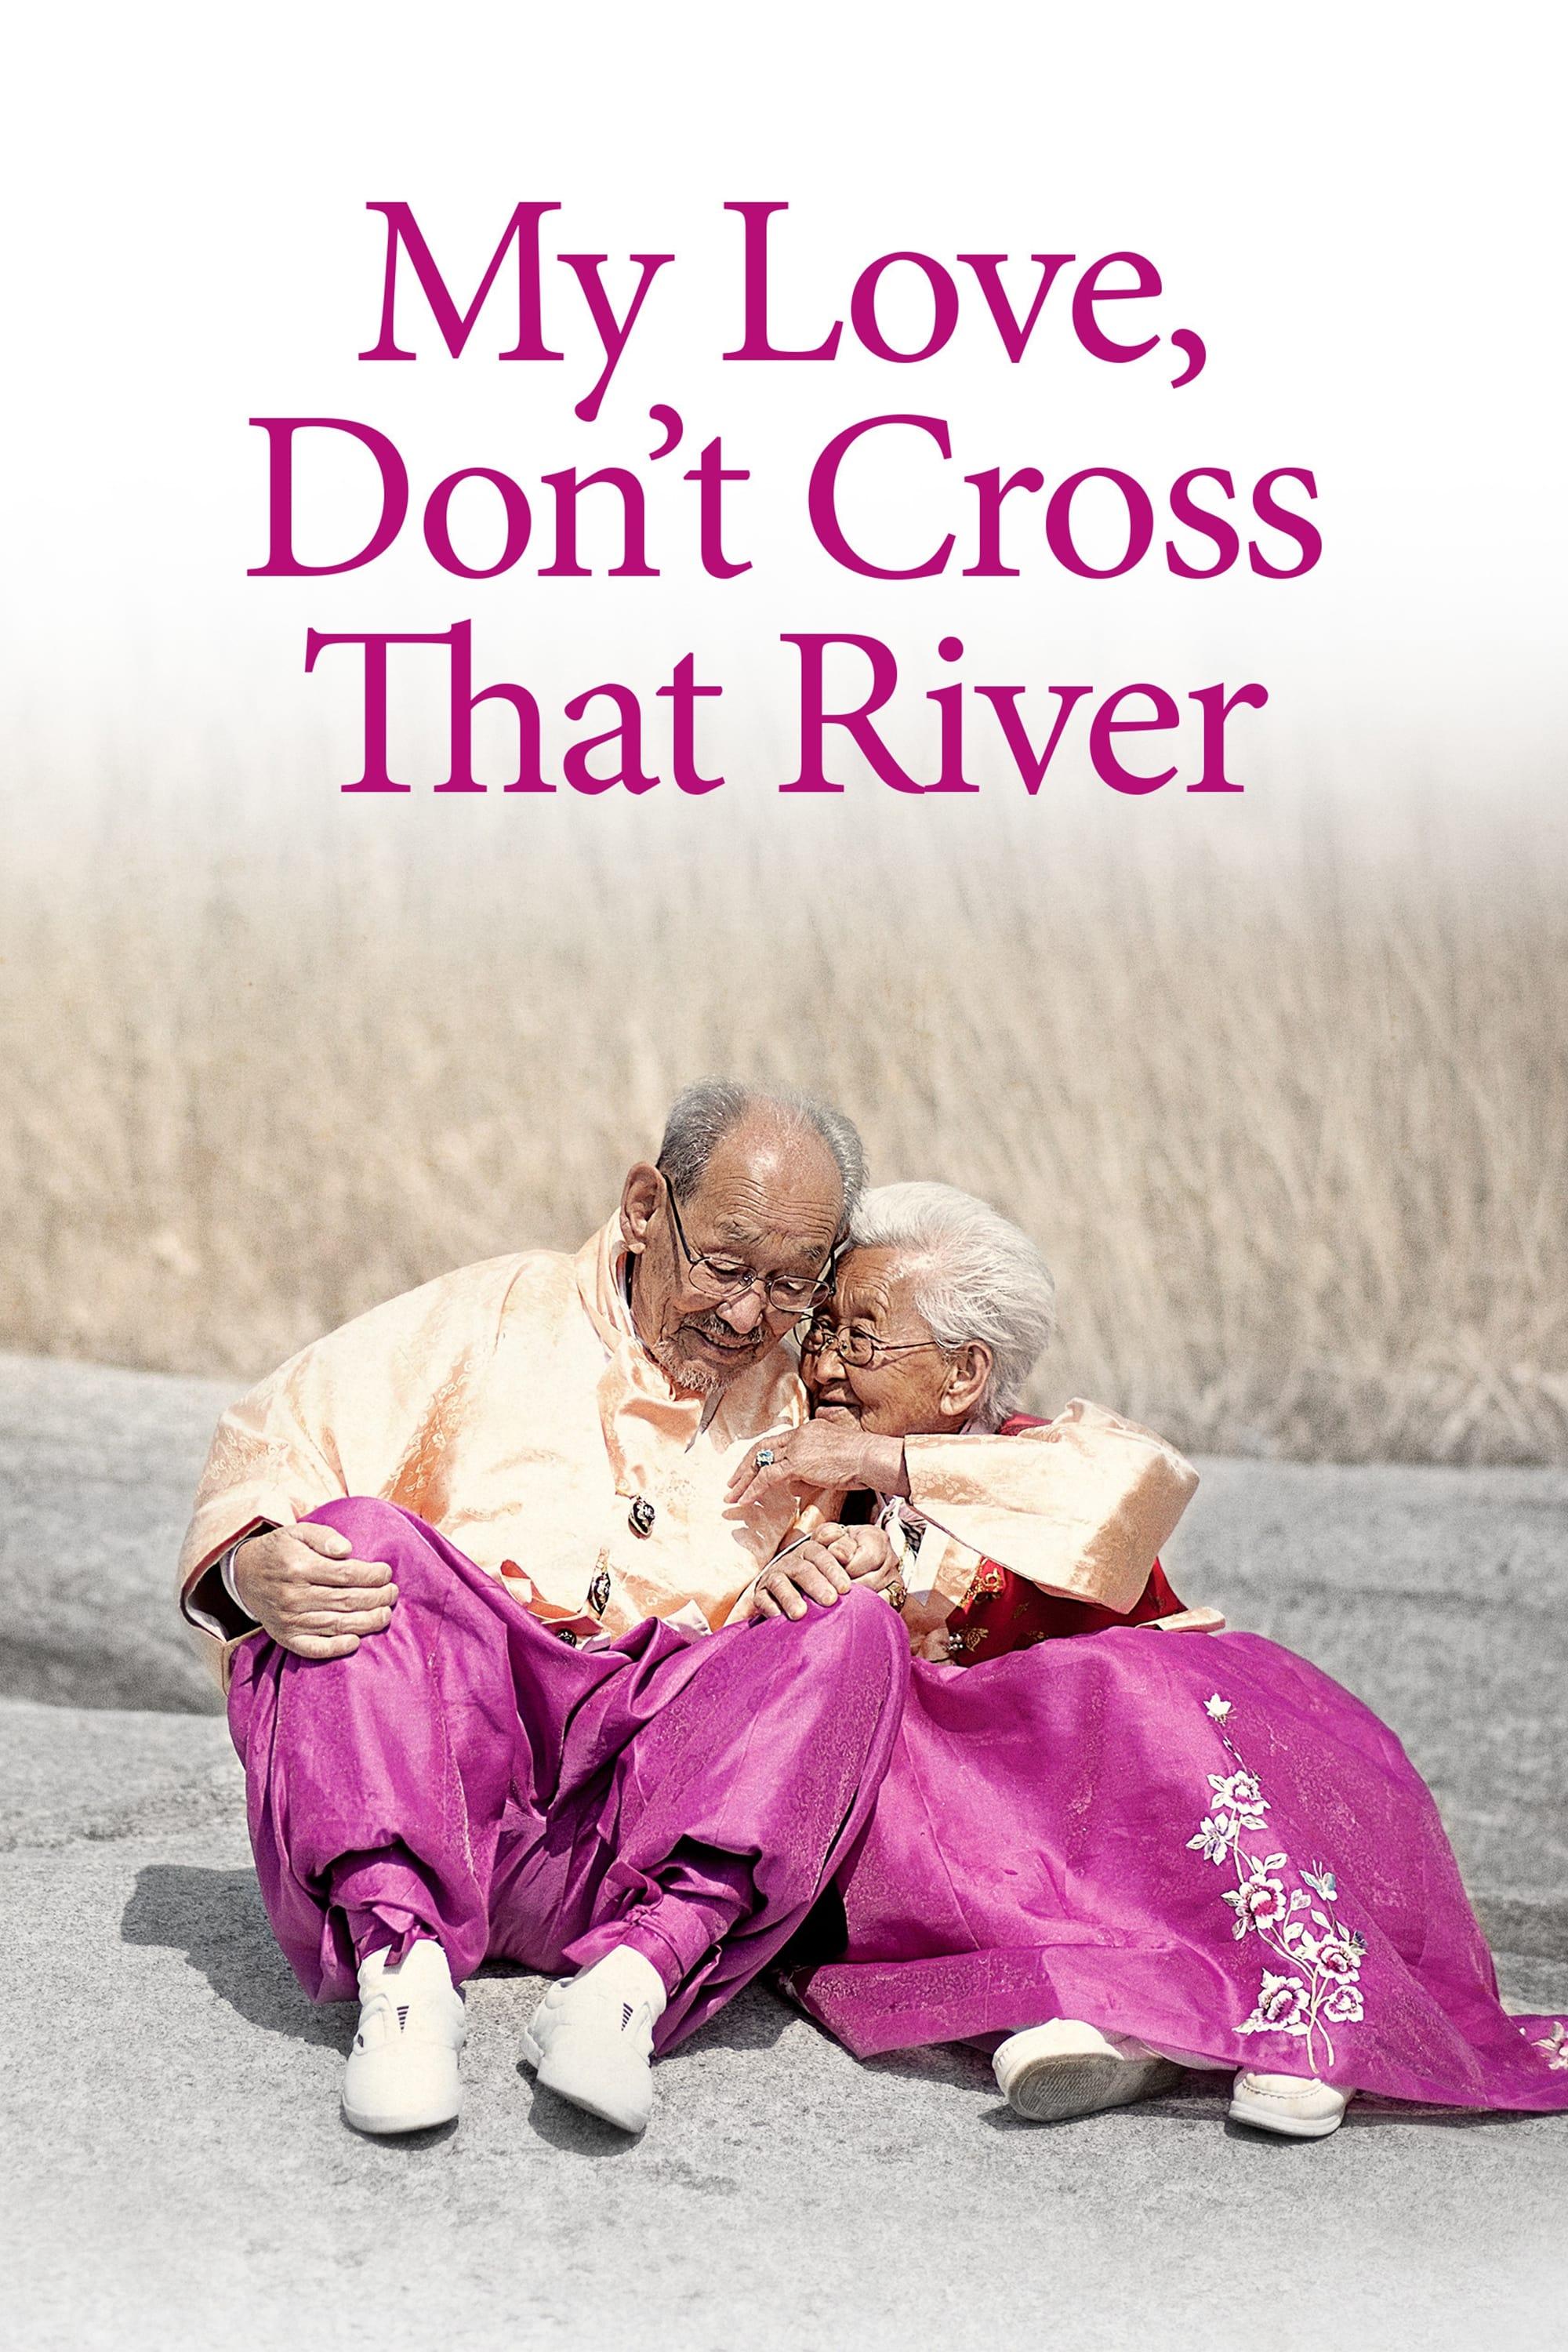 My Love, Don't Cross That River poster